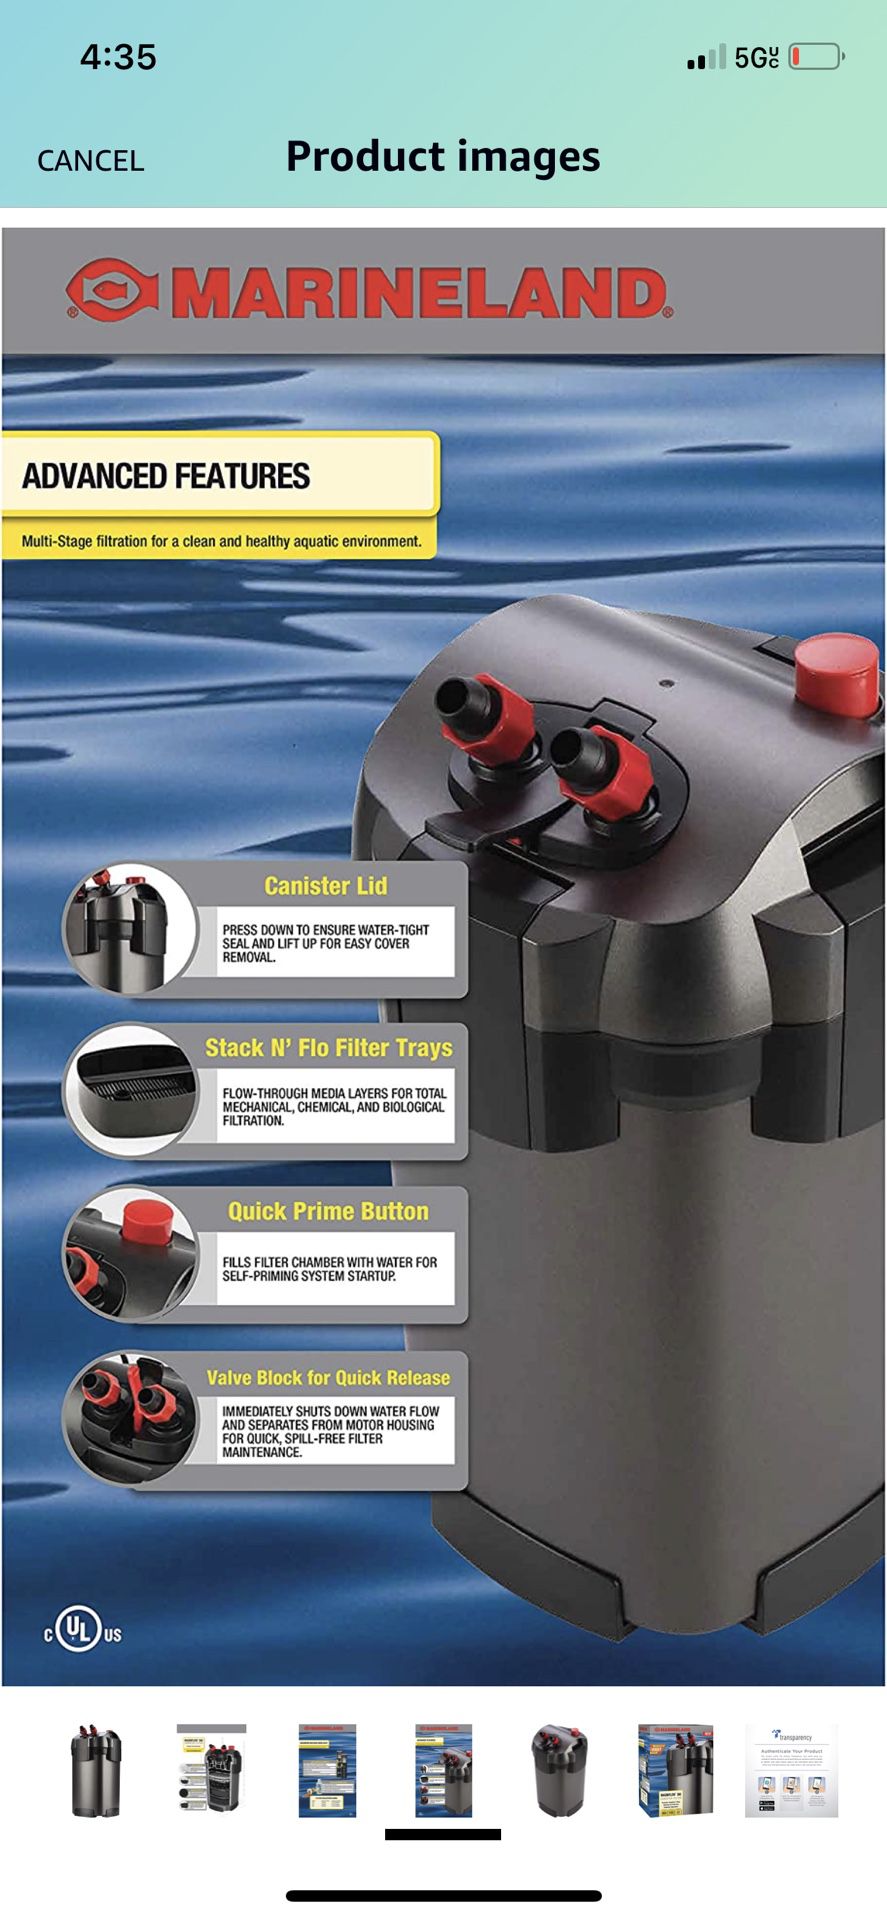 Marineland Magniflow Canister Filter For aquariums, Easy Maintenance